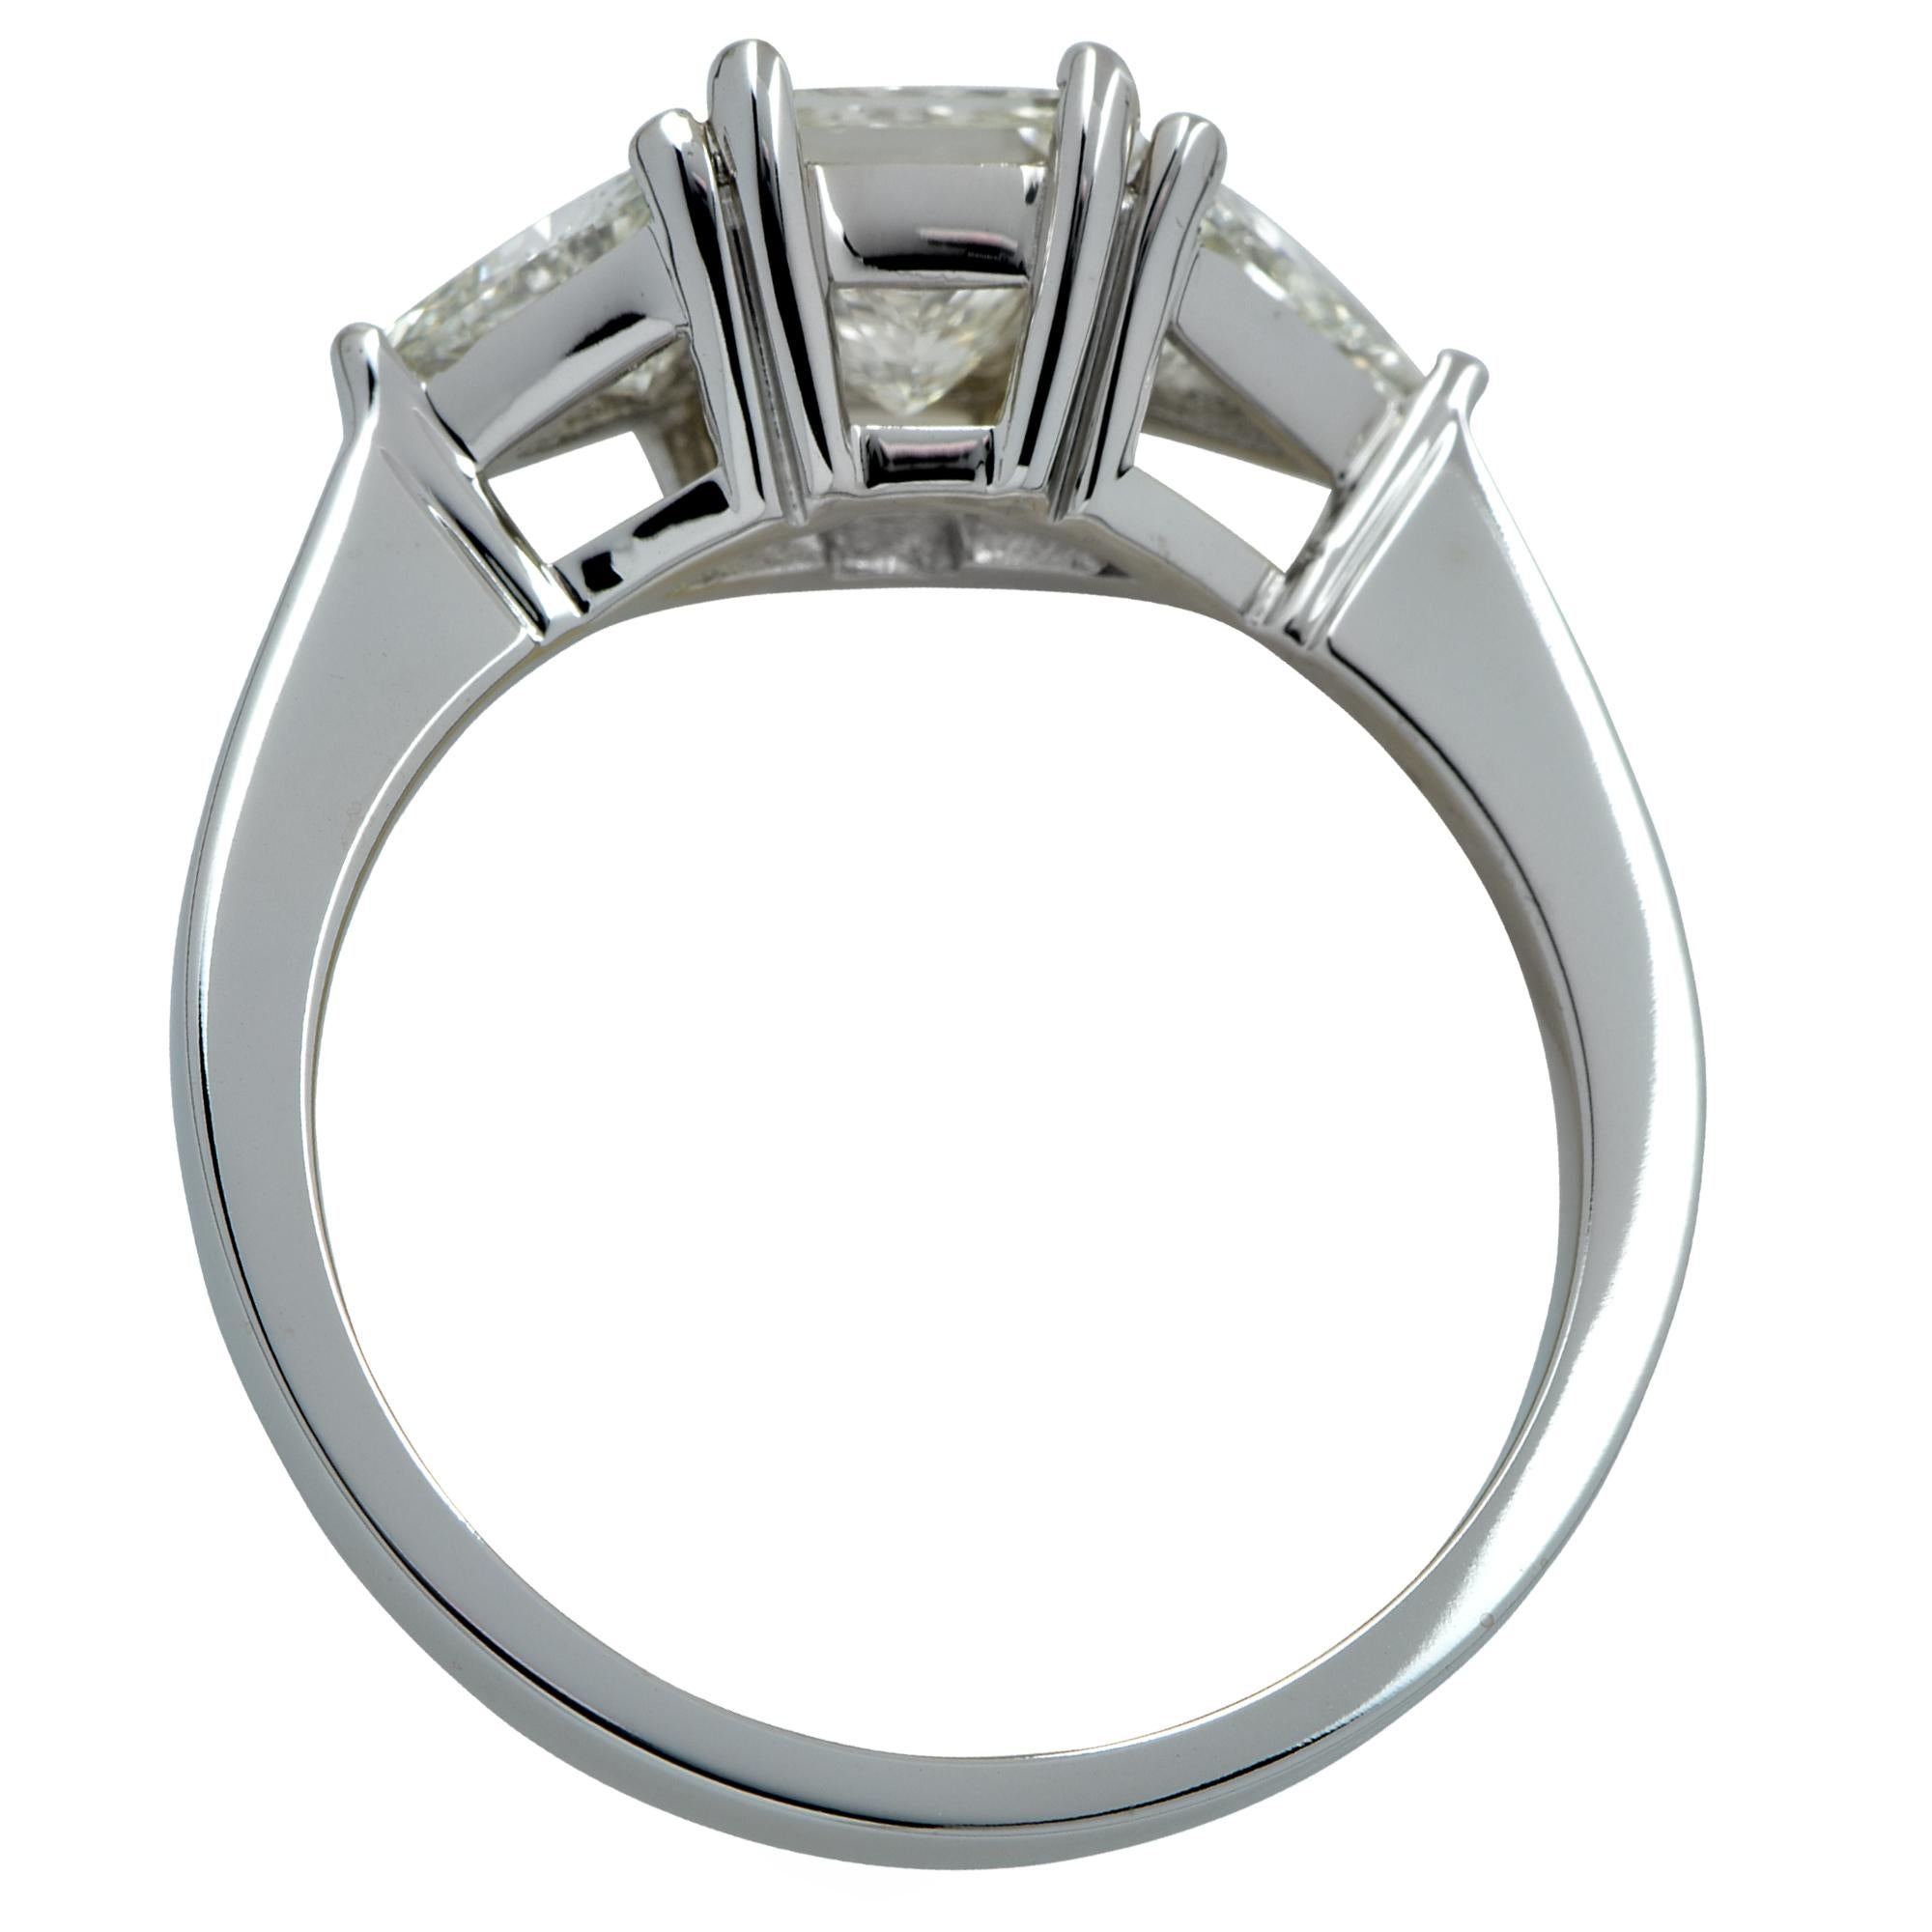 Stunning 14k white gold three stone ring showcasing a princess cut diamond weighing approximately .90cts K color SI clarity accented by 2 trillion cut diamonds weighing .50cts total, J color VS clarity. The band of this size 6 ring measures 1.42mm